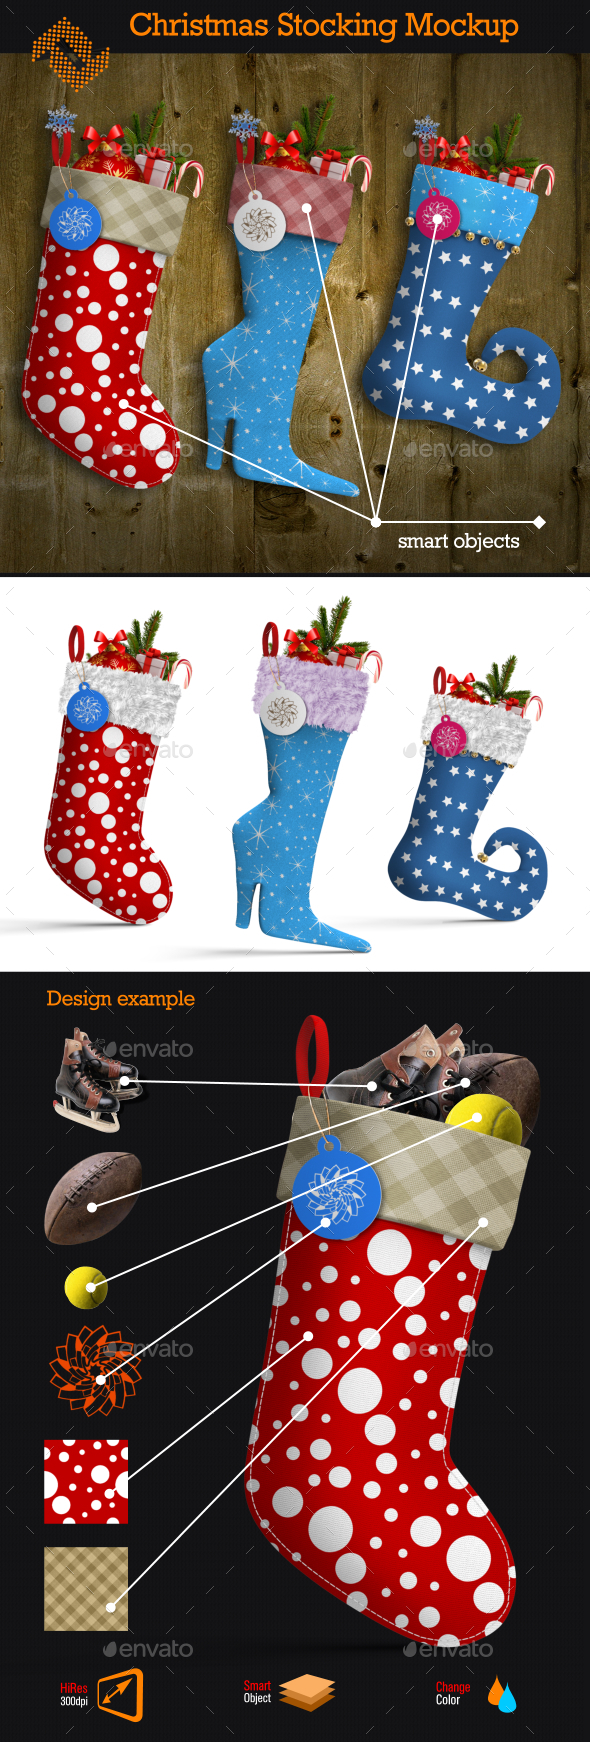 Download Christmas Stocking Mockup by Fusionhorn | GraphicRiver